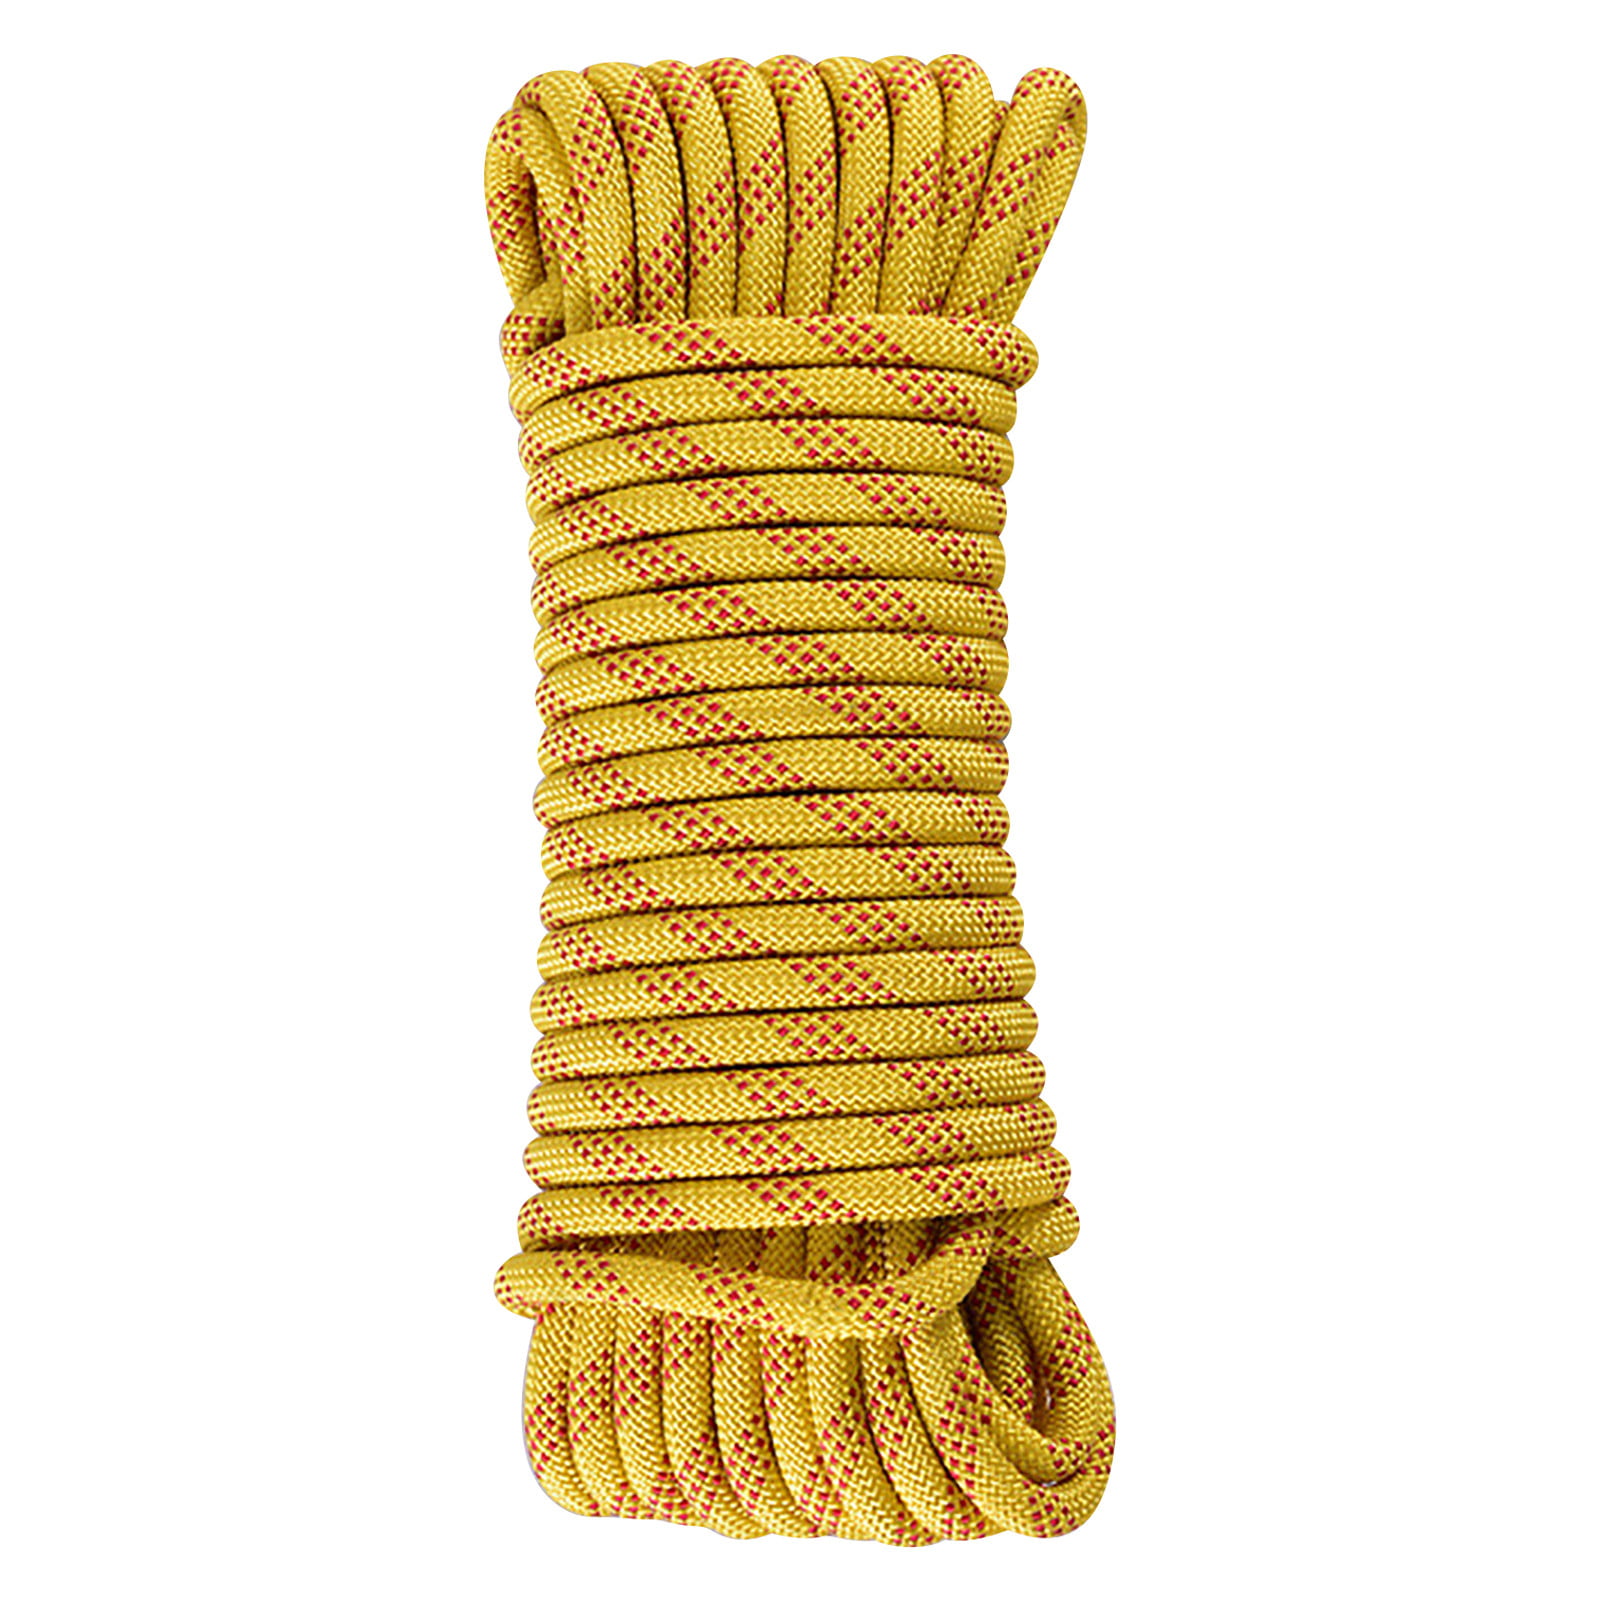 10mm Braided Polypropylene Poly Rope Cord Boat Yacht Sailing Climbing 